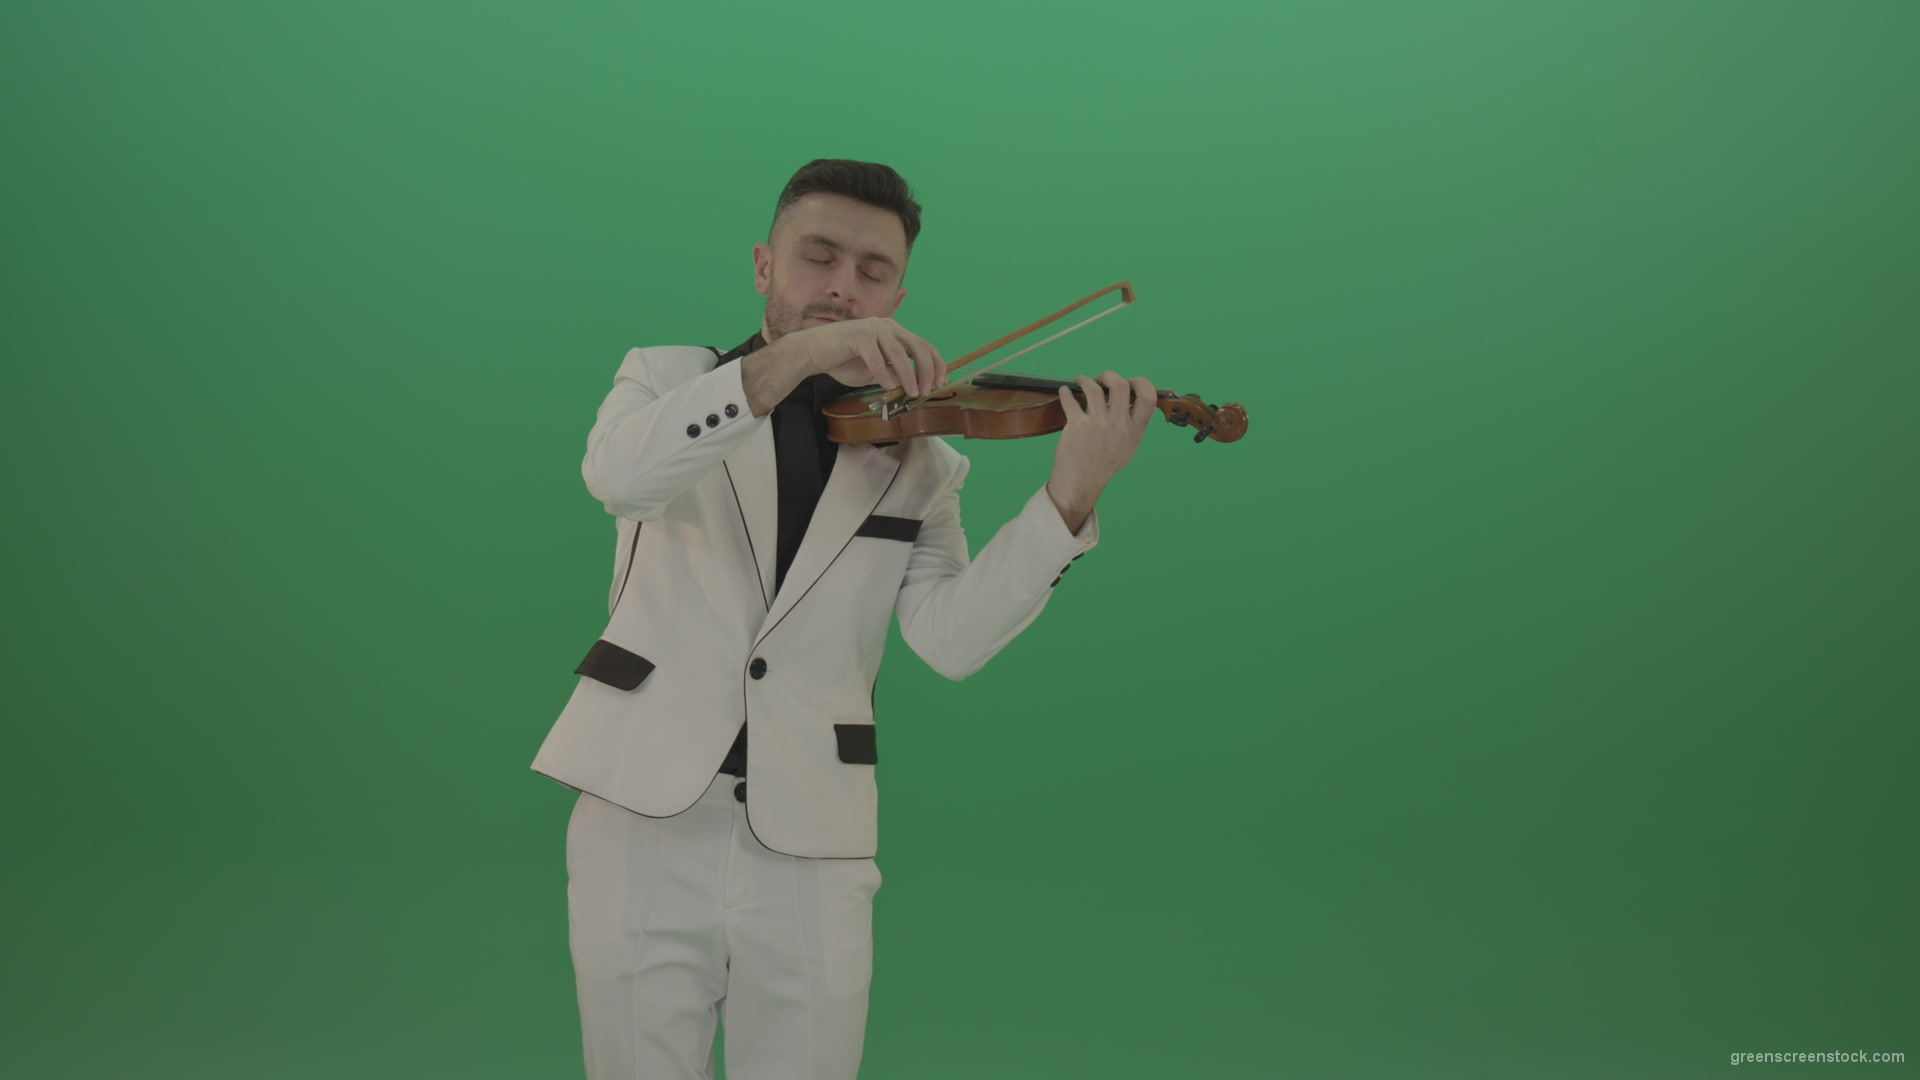 Man-is-playing-slow-love-in-white-costume-on-violin-Fiddle-string-music-instrument-isolated-on-green-screen_001 Green Screen Stock